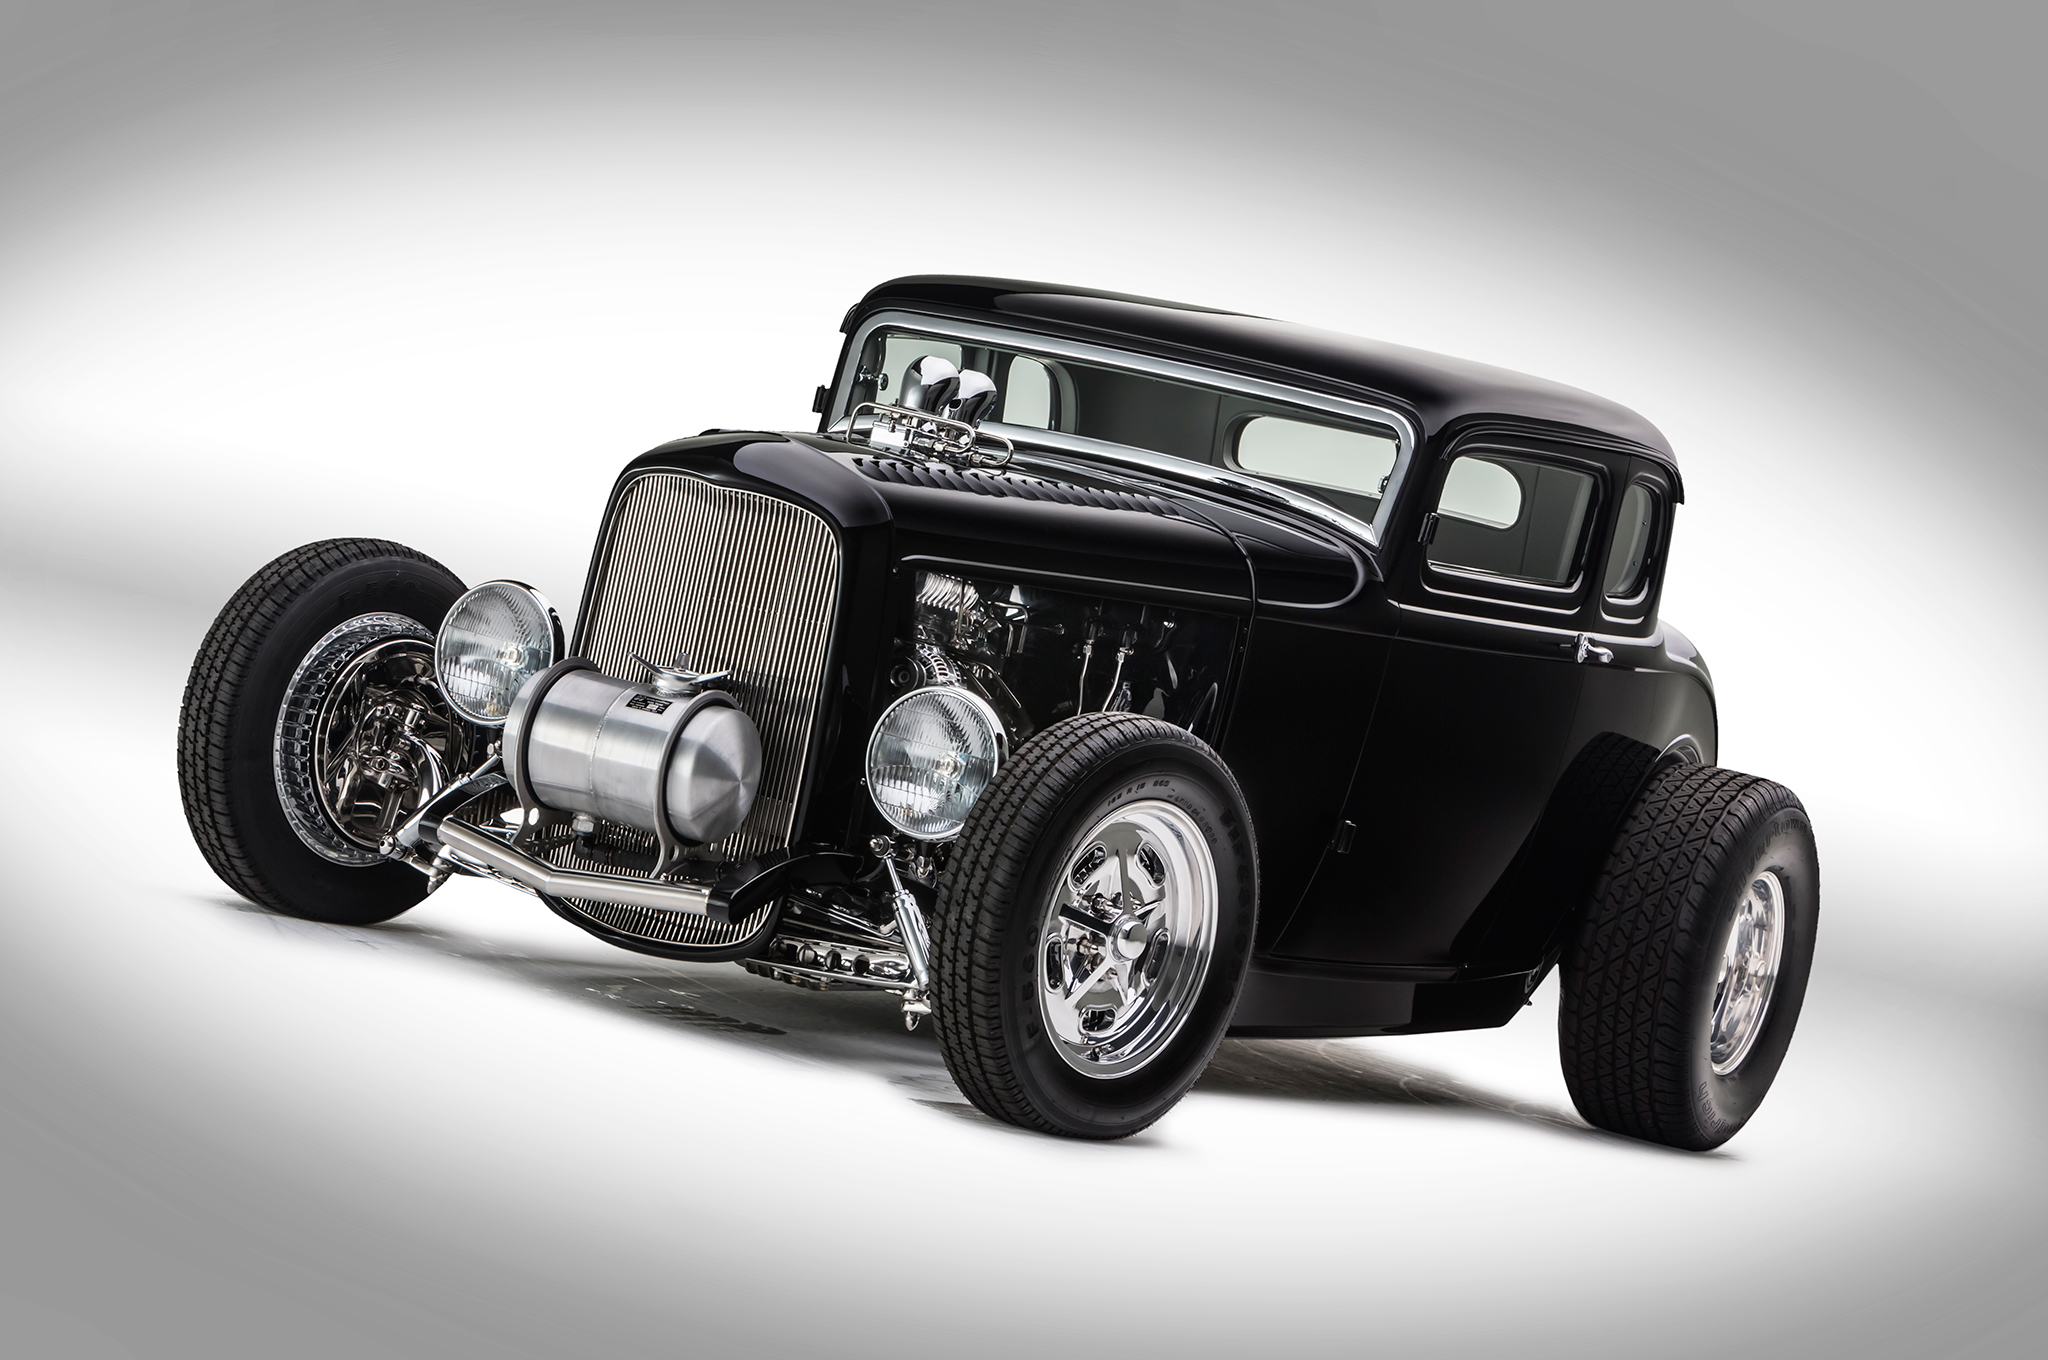 1932 Ford Coupe Hd Wallpaper Background Image 2048x1360